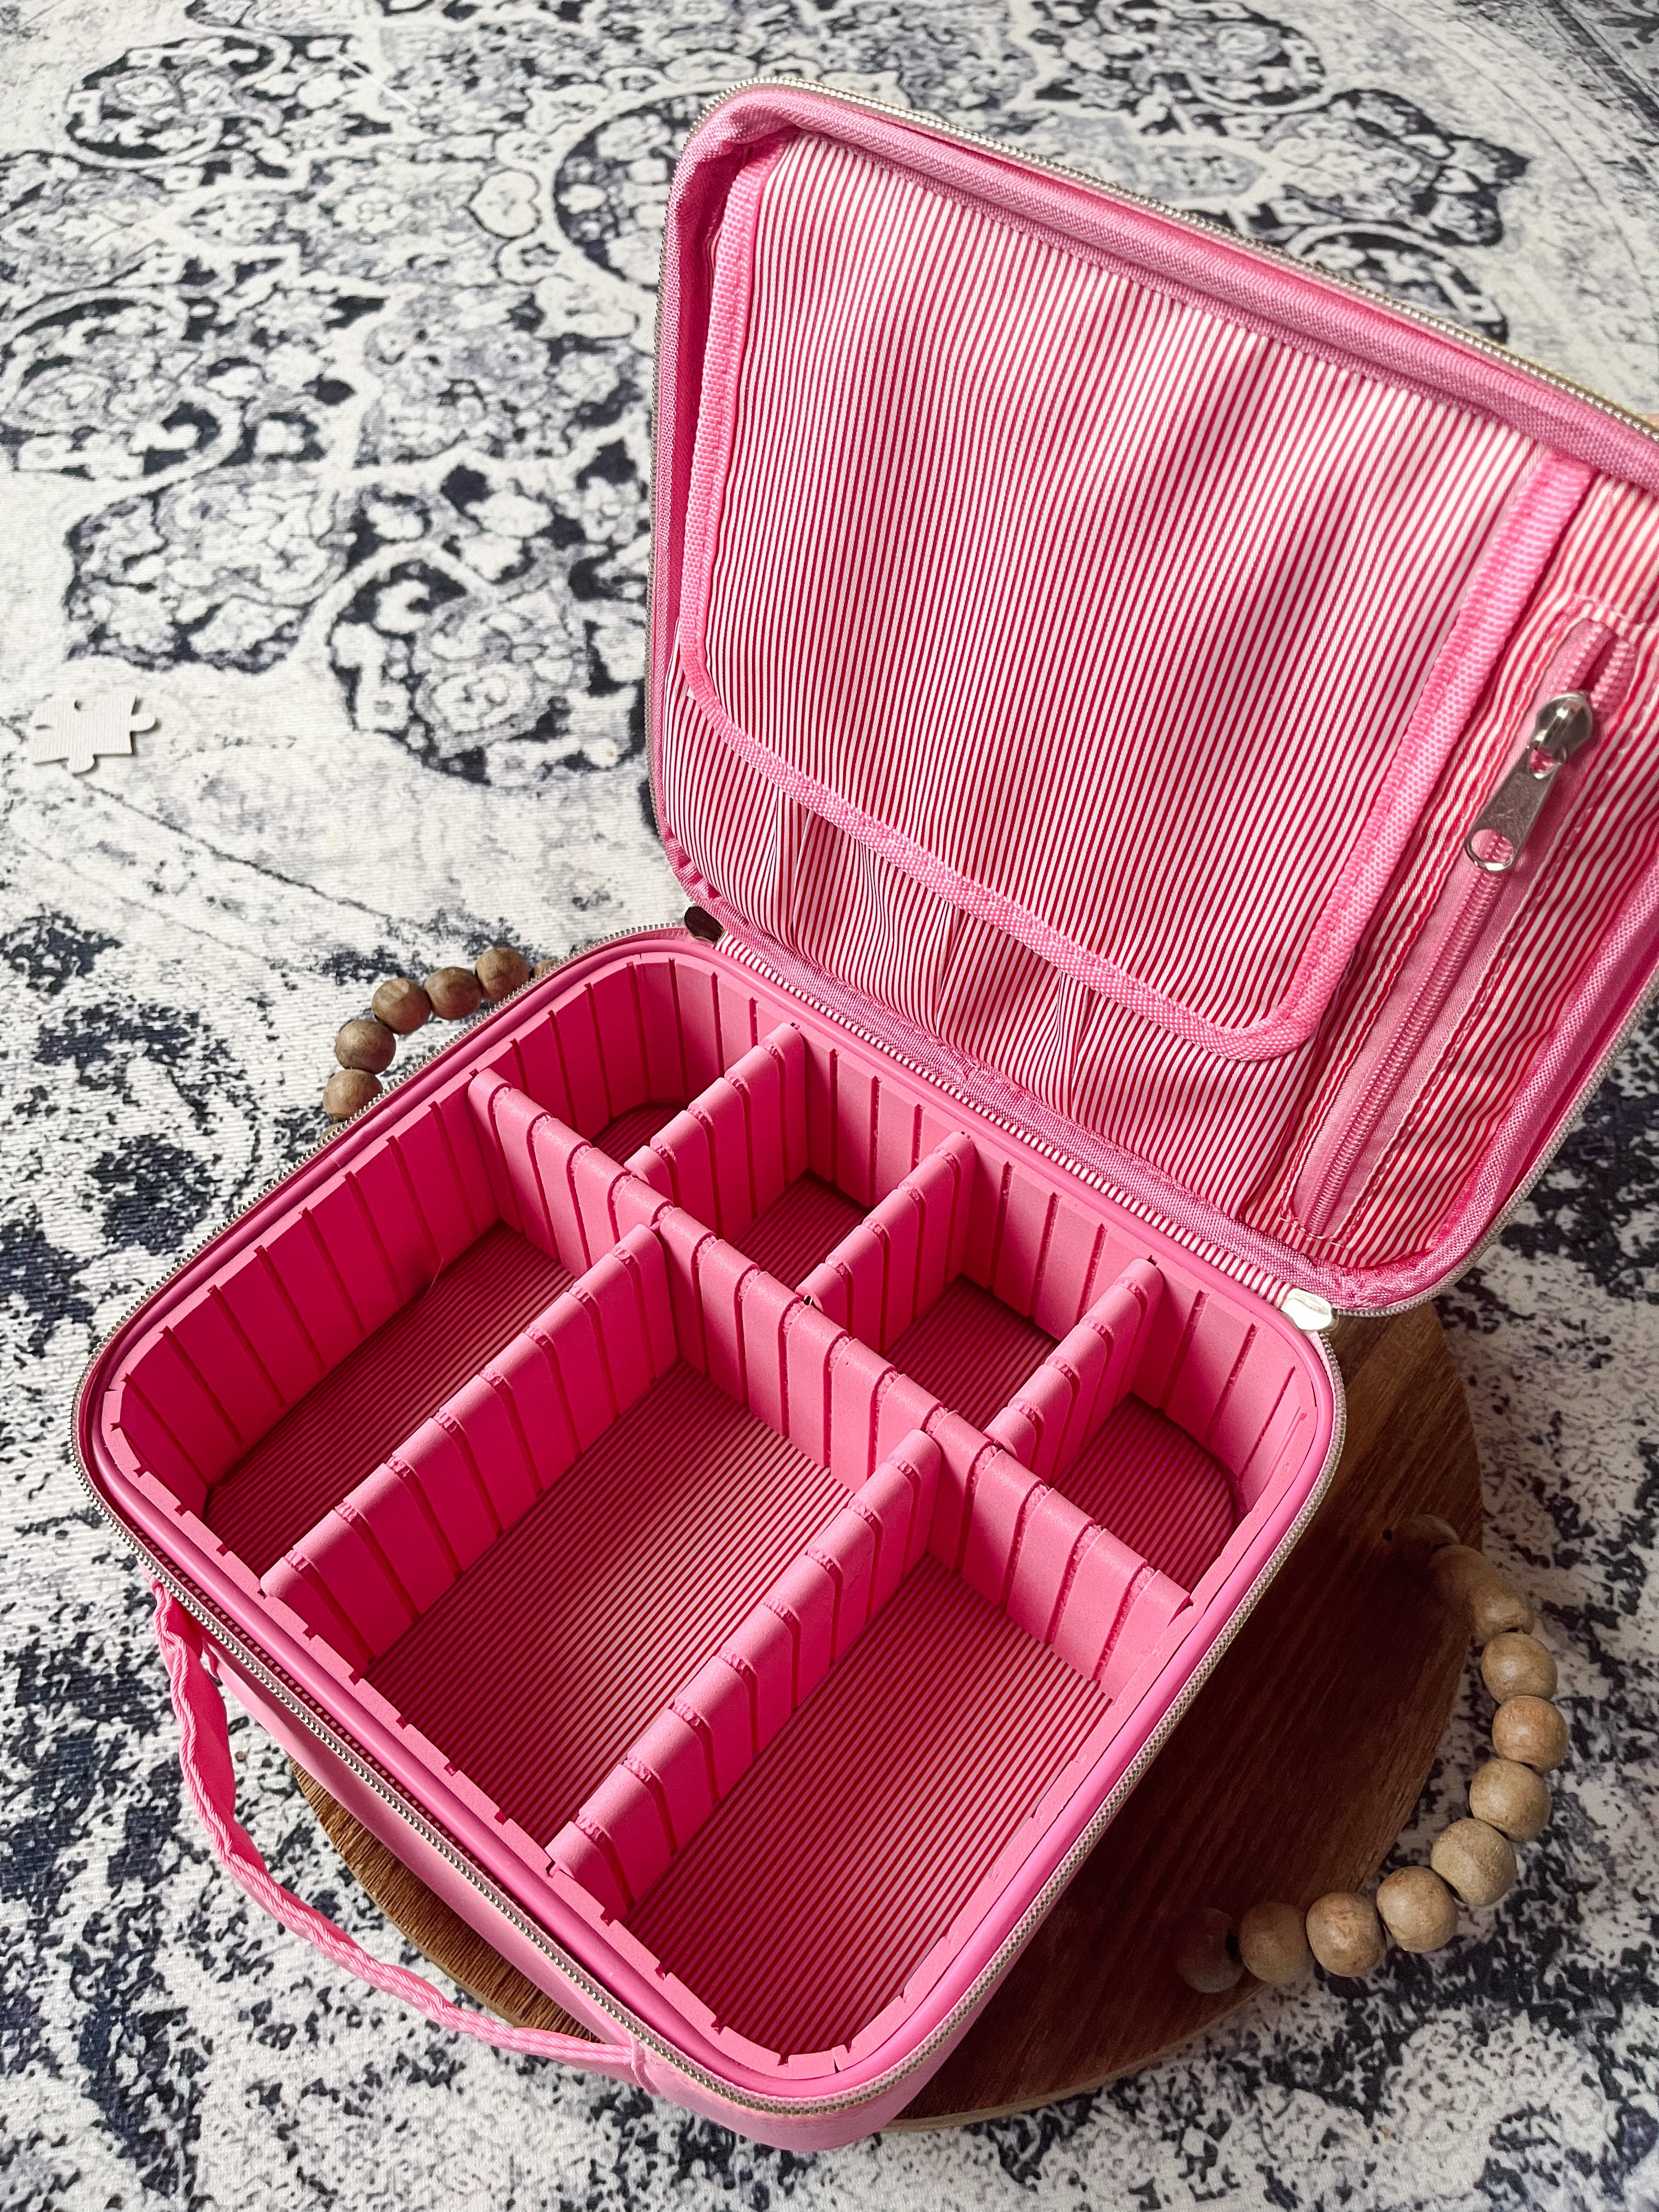 Glam Girl Cosmetic Case